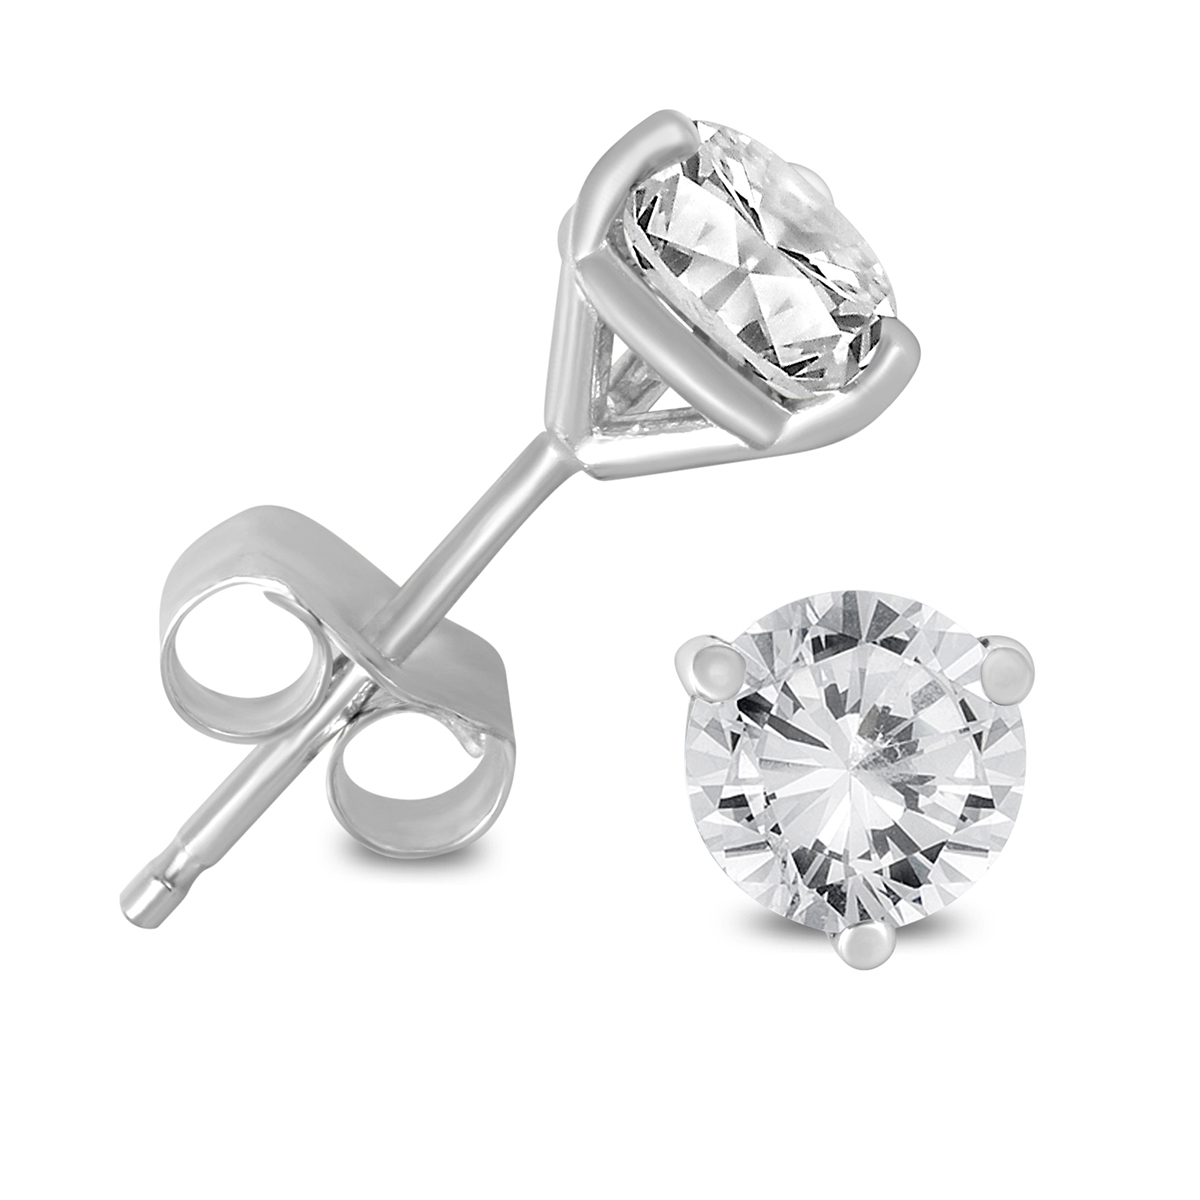 3/4 Carat TW AGS Certified Martini Set Round Diamond Solitaire Earrings in 14K White Gold